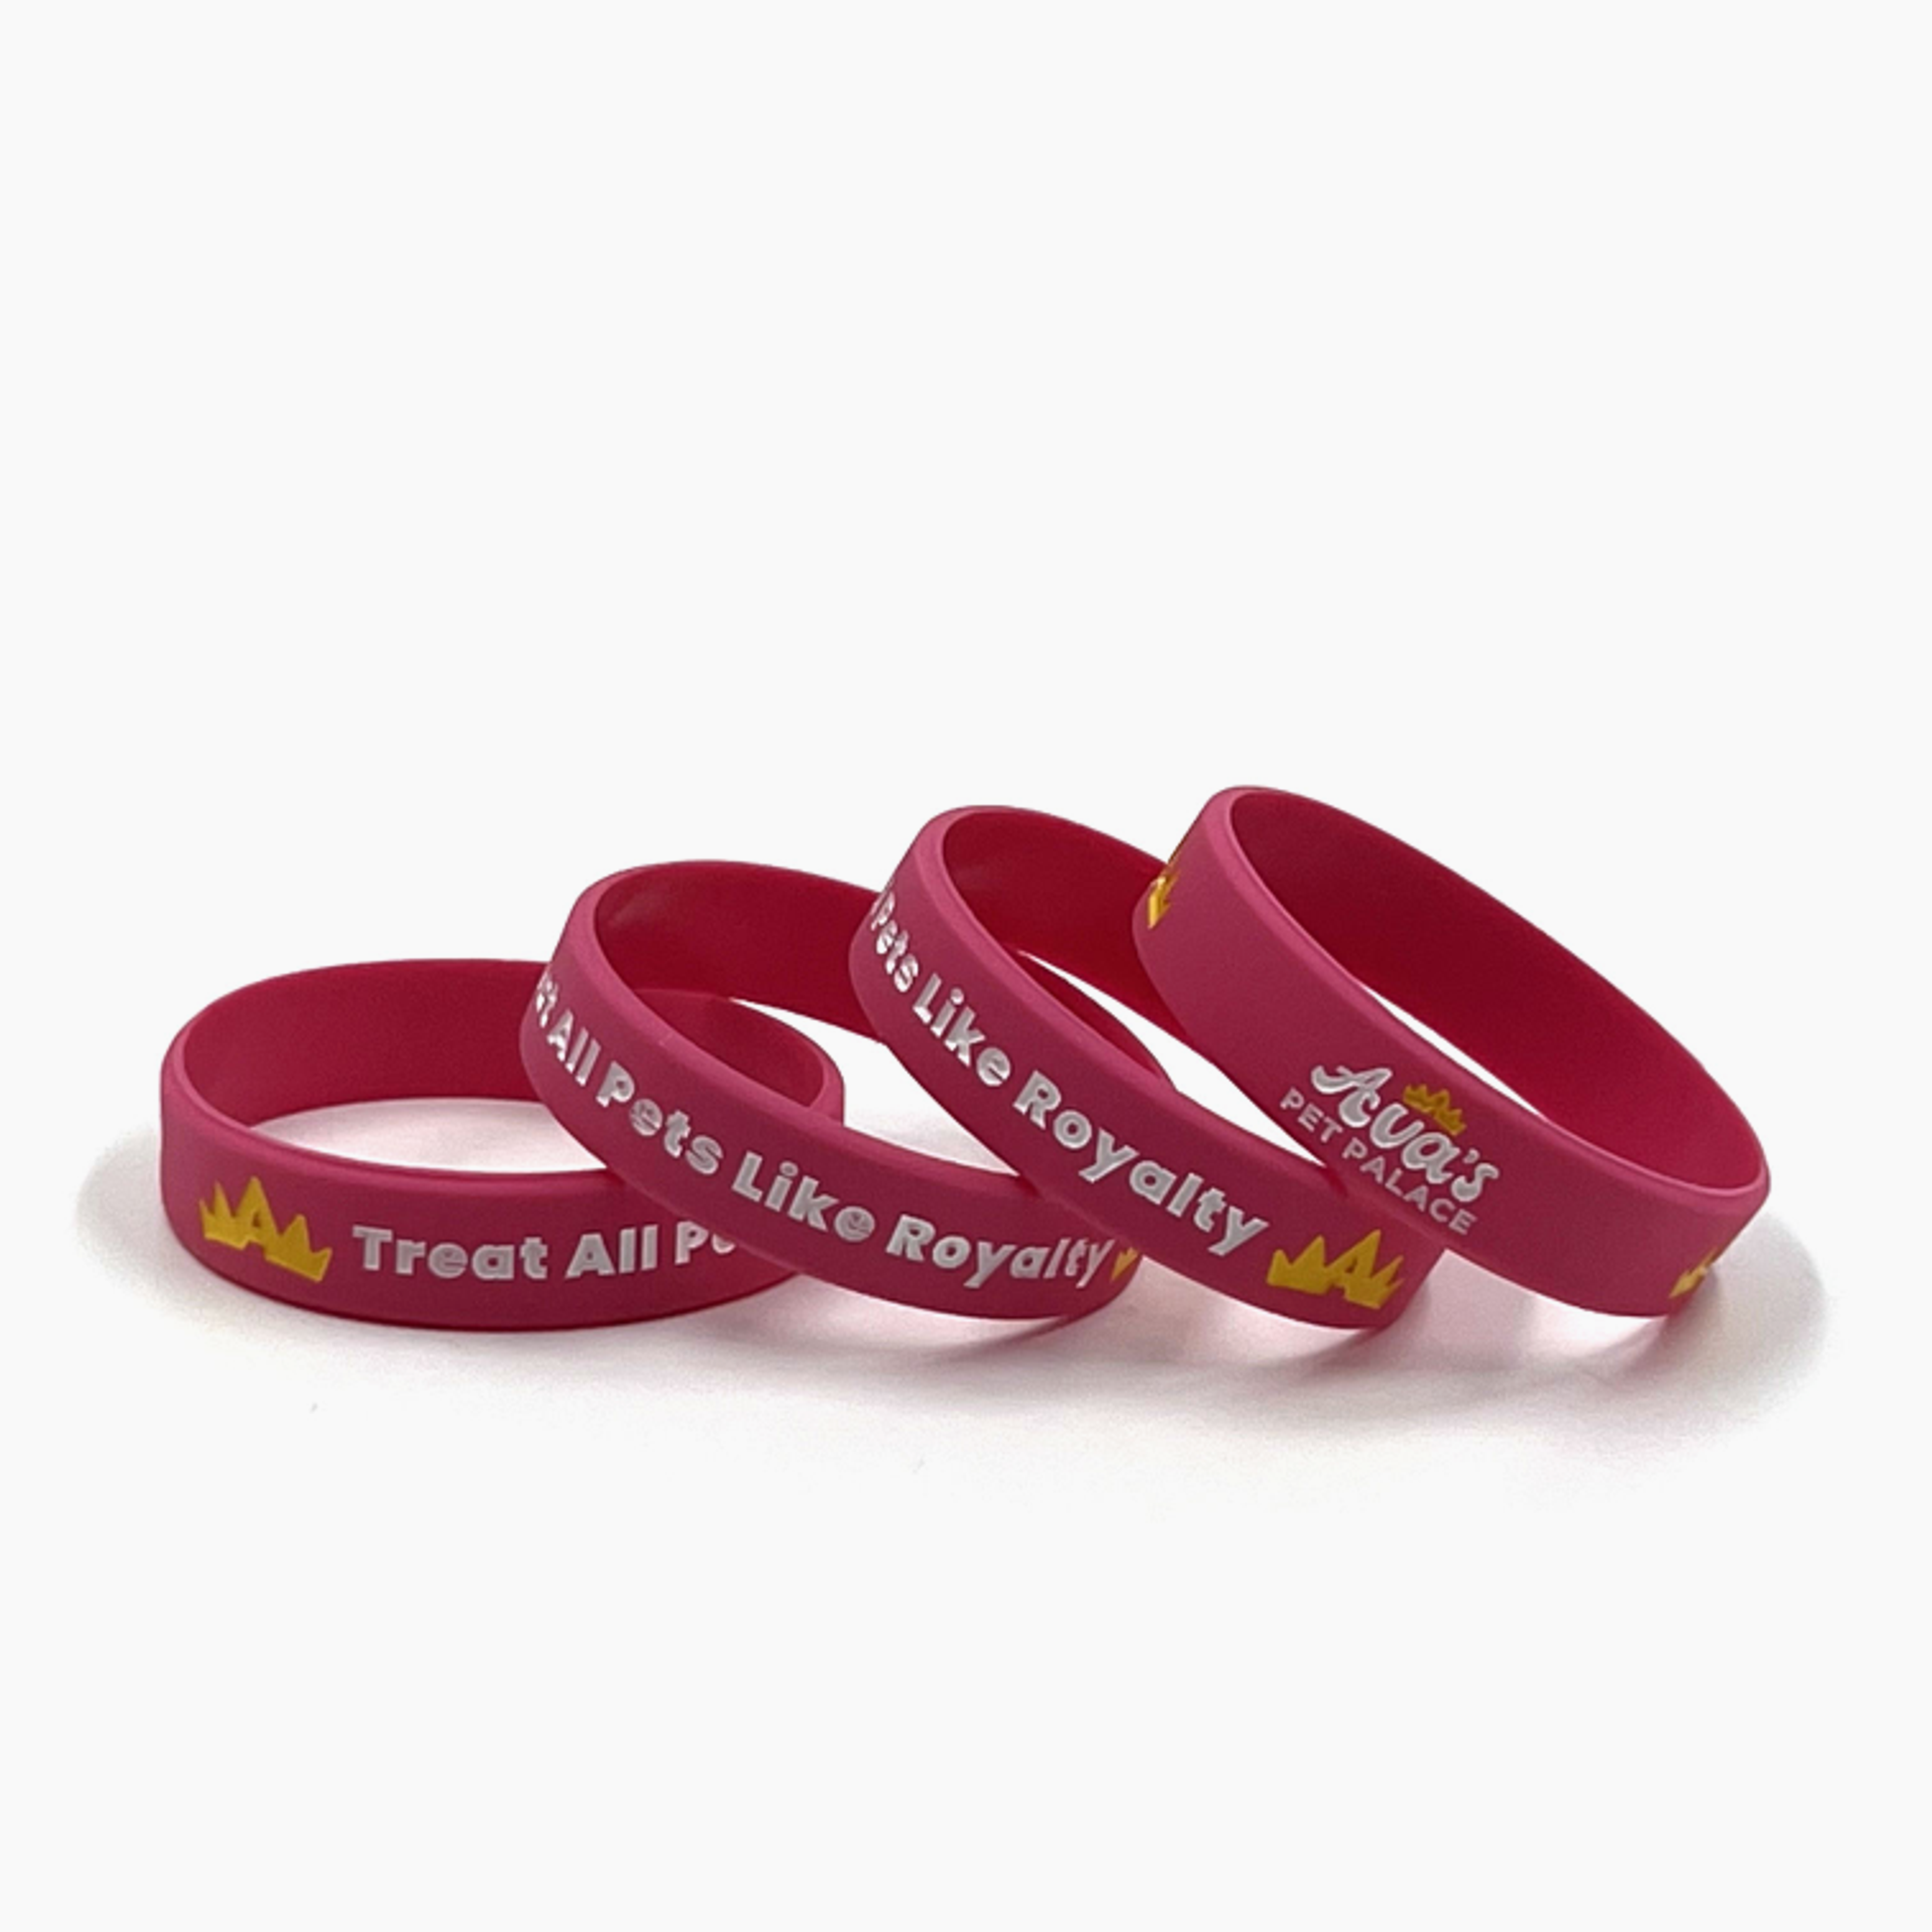 Treat All Pets Like Royalty band - All proceeds go to charity!